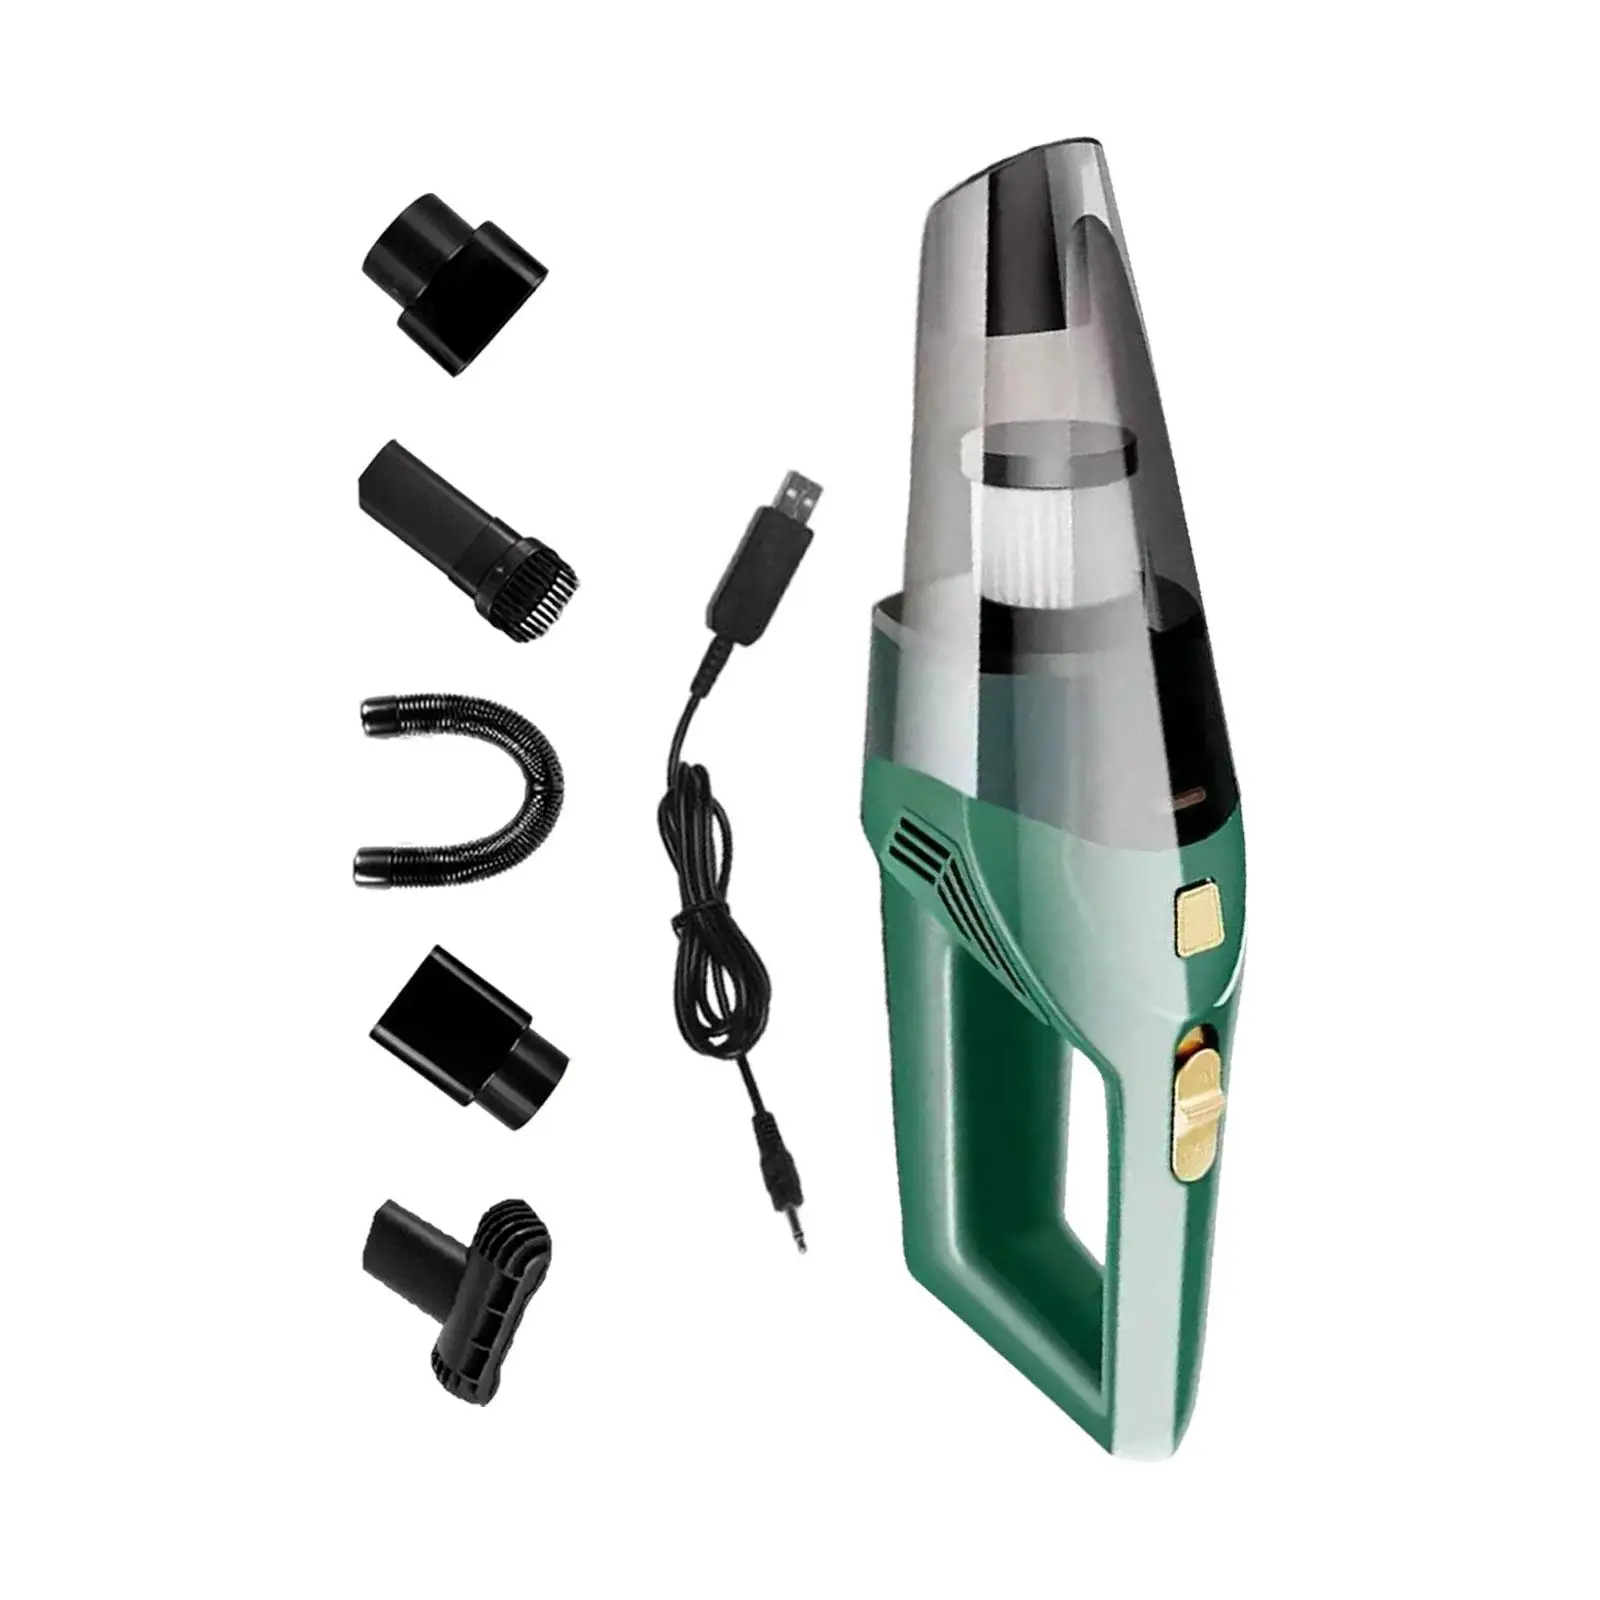 4800PA Car Vacuum Cleaner Wet and Dry Using for Pet Hair Detailing Cleaning